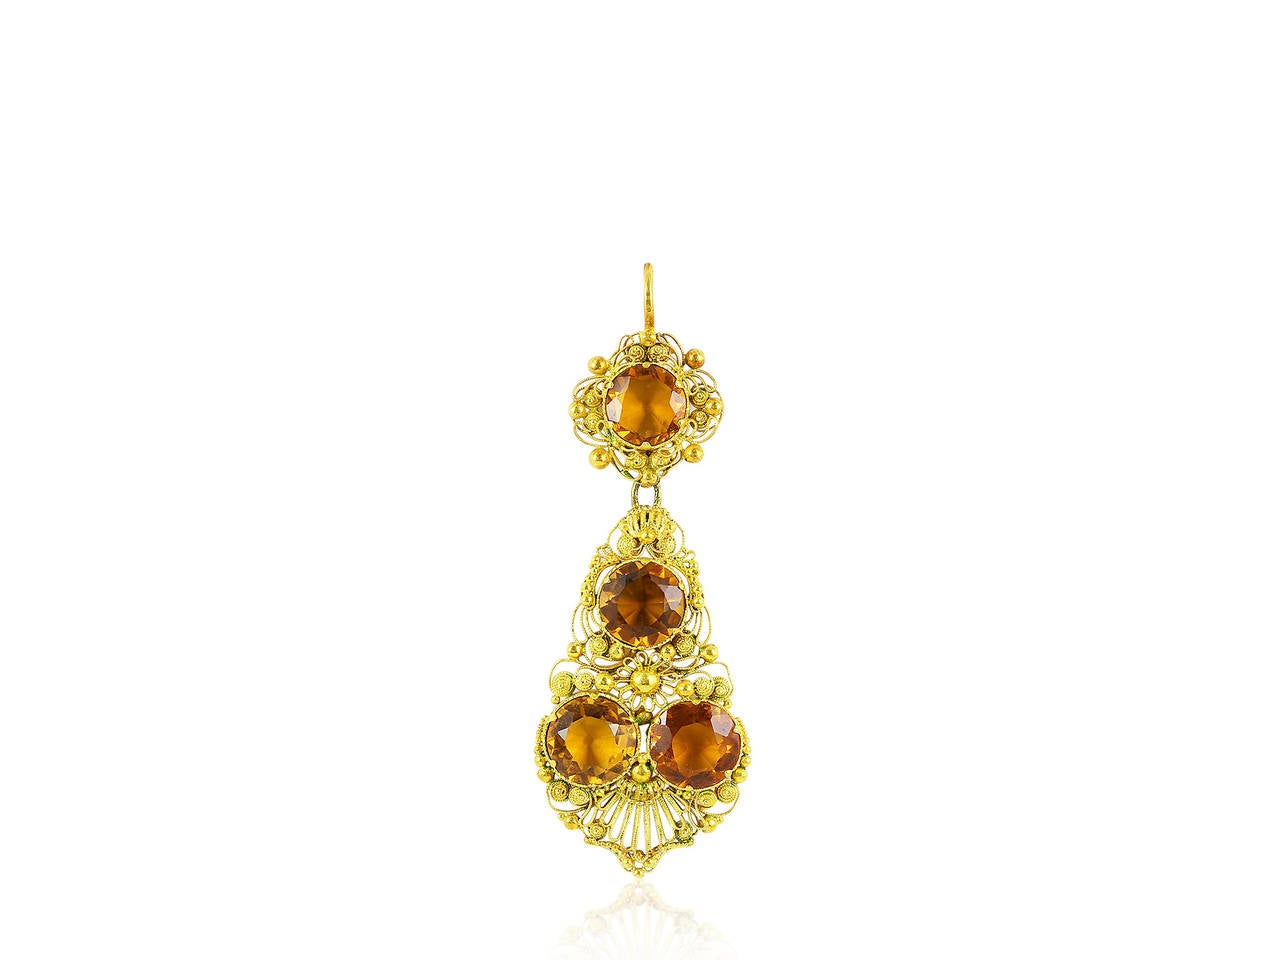 Antique Victorian 18 karat yellow gold, earring and pin/pendant suite designed in an ornate wire floral motif with granulation. The drop earrings consist of  8 old European cut citrine stones having an estimated total weight of 14.50 carats and the